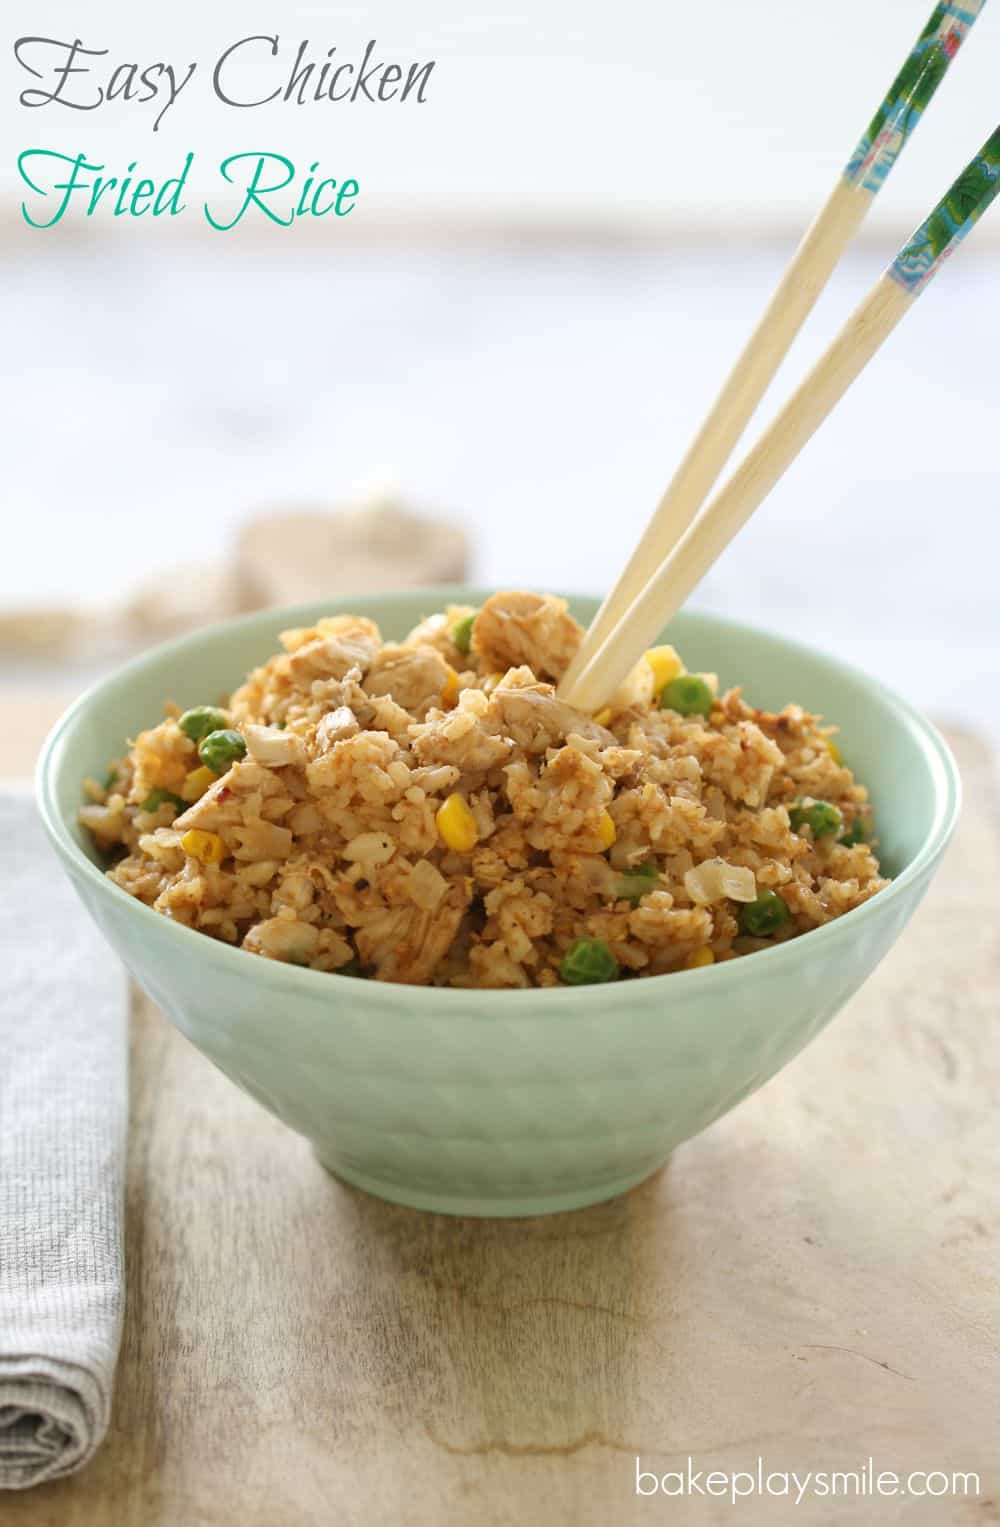 Fried rice and chopsticks in a pale blue bowl